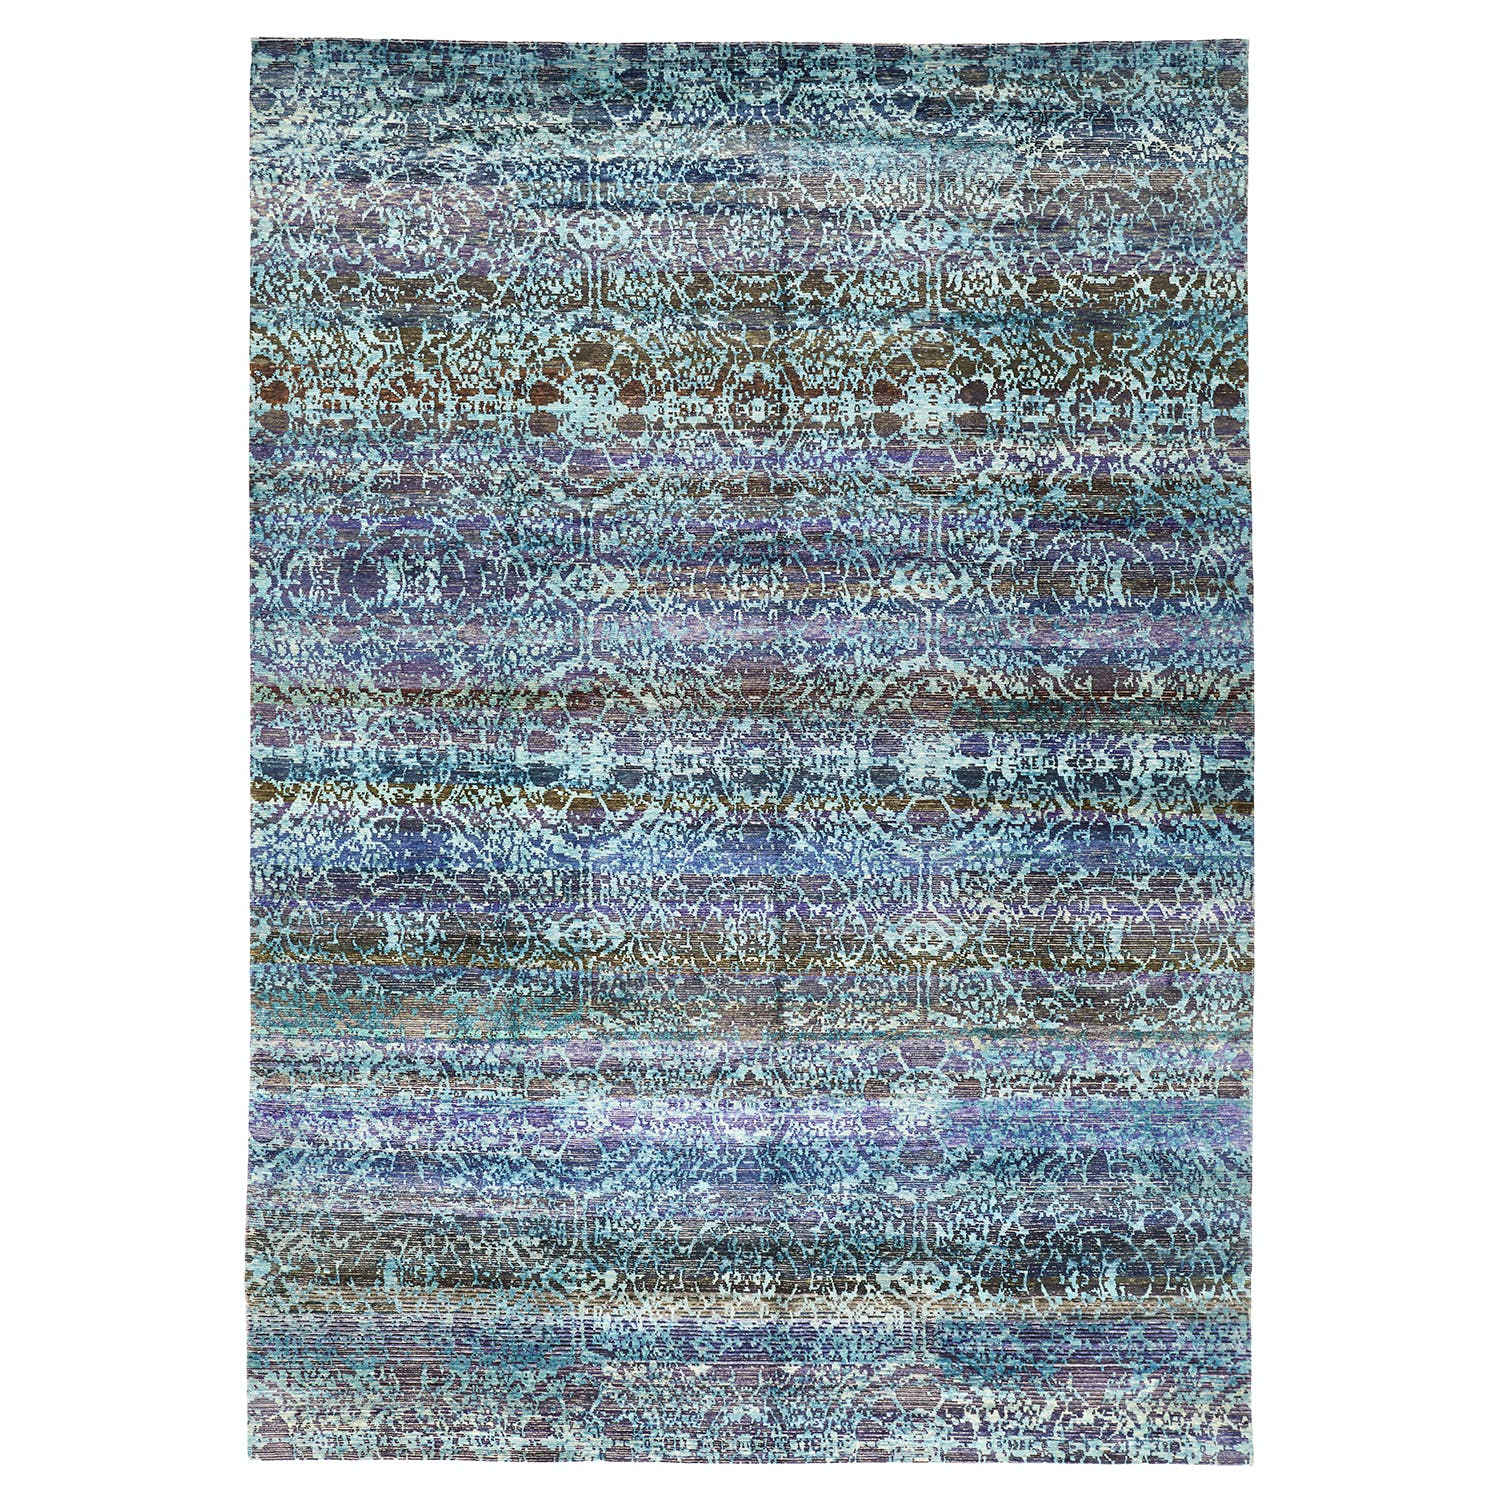 Vintage-style decorative rug with intricate geometric and abstract pattern.